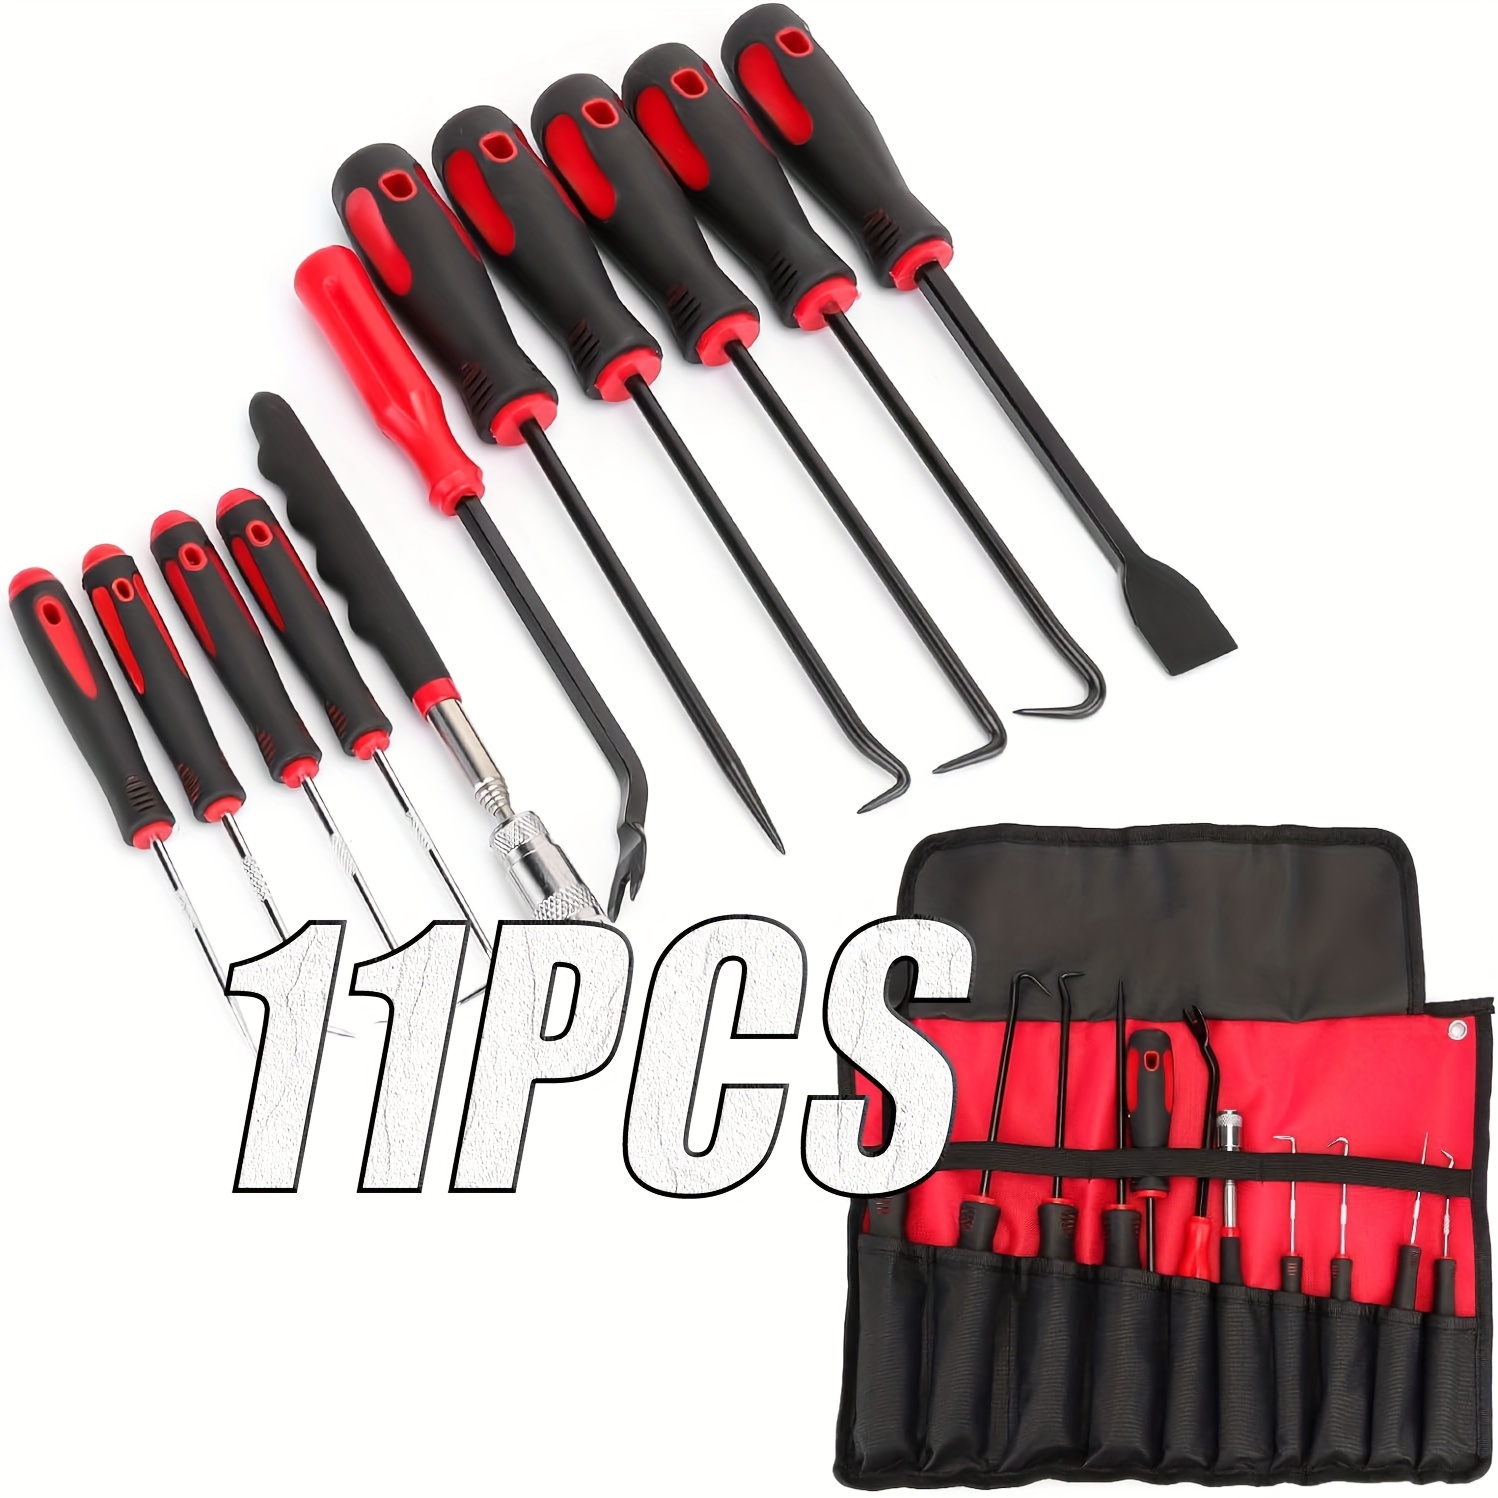 

11pcs Steel Precision Pick & Hook Set With Scraper And Magnetic Telescoping Tool Kit For Remove Automotive Electronics Maintenance Hoses Gasket Hand Pick Up Tools